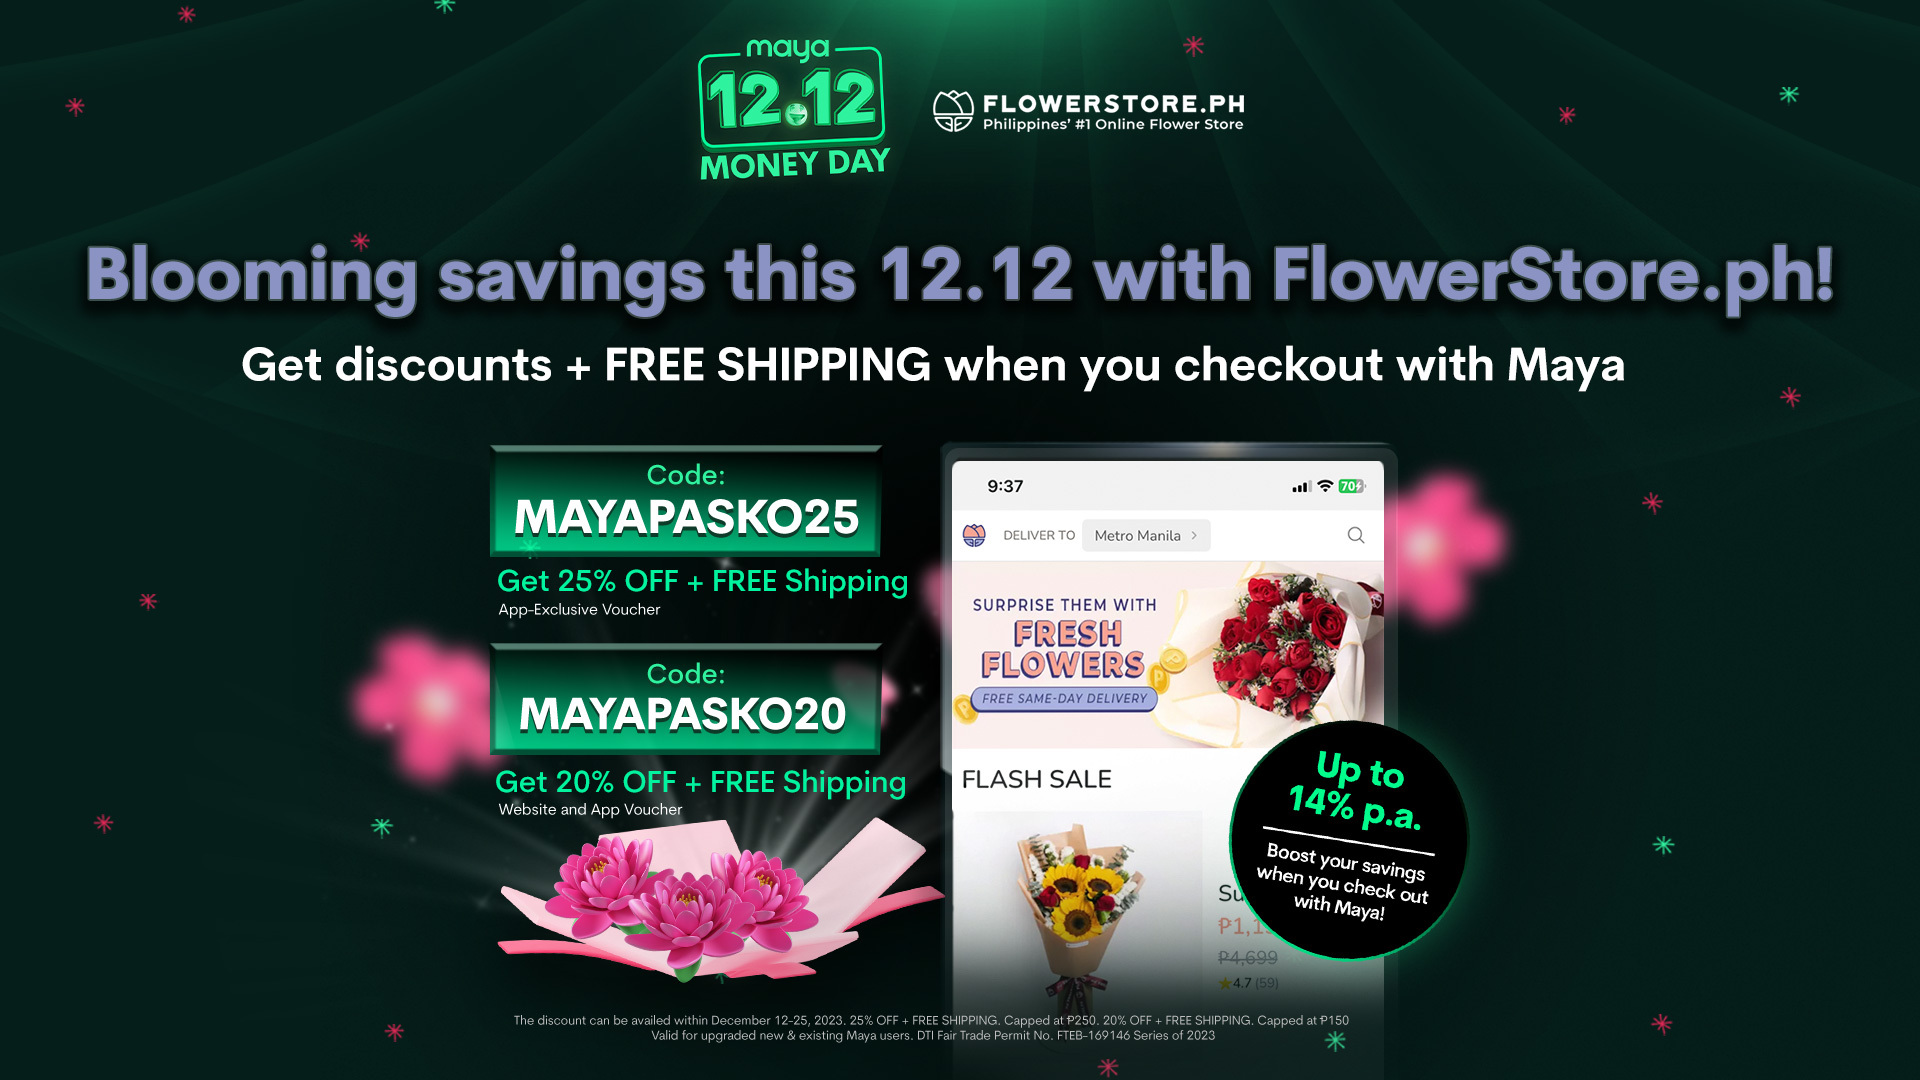 Get up to 25% off + FREE Shipping on FlowerStore.ph's 12.12 Mega Christmas Sale!